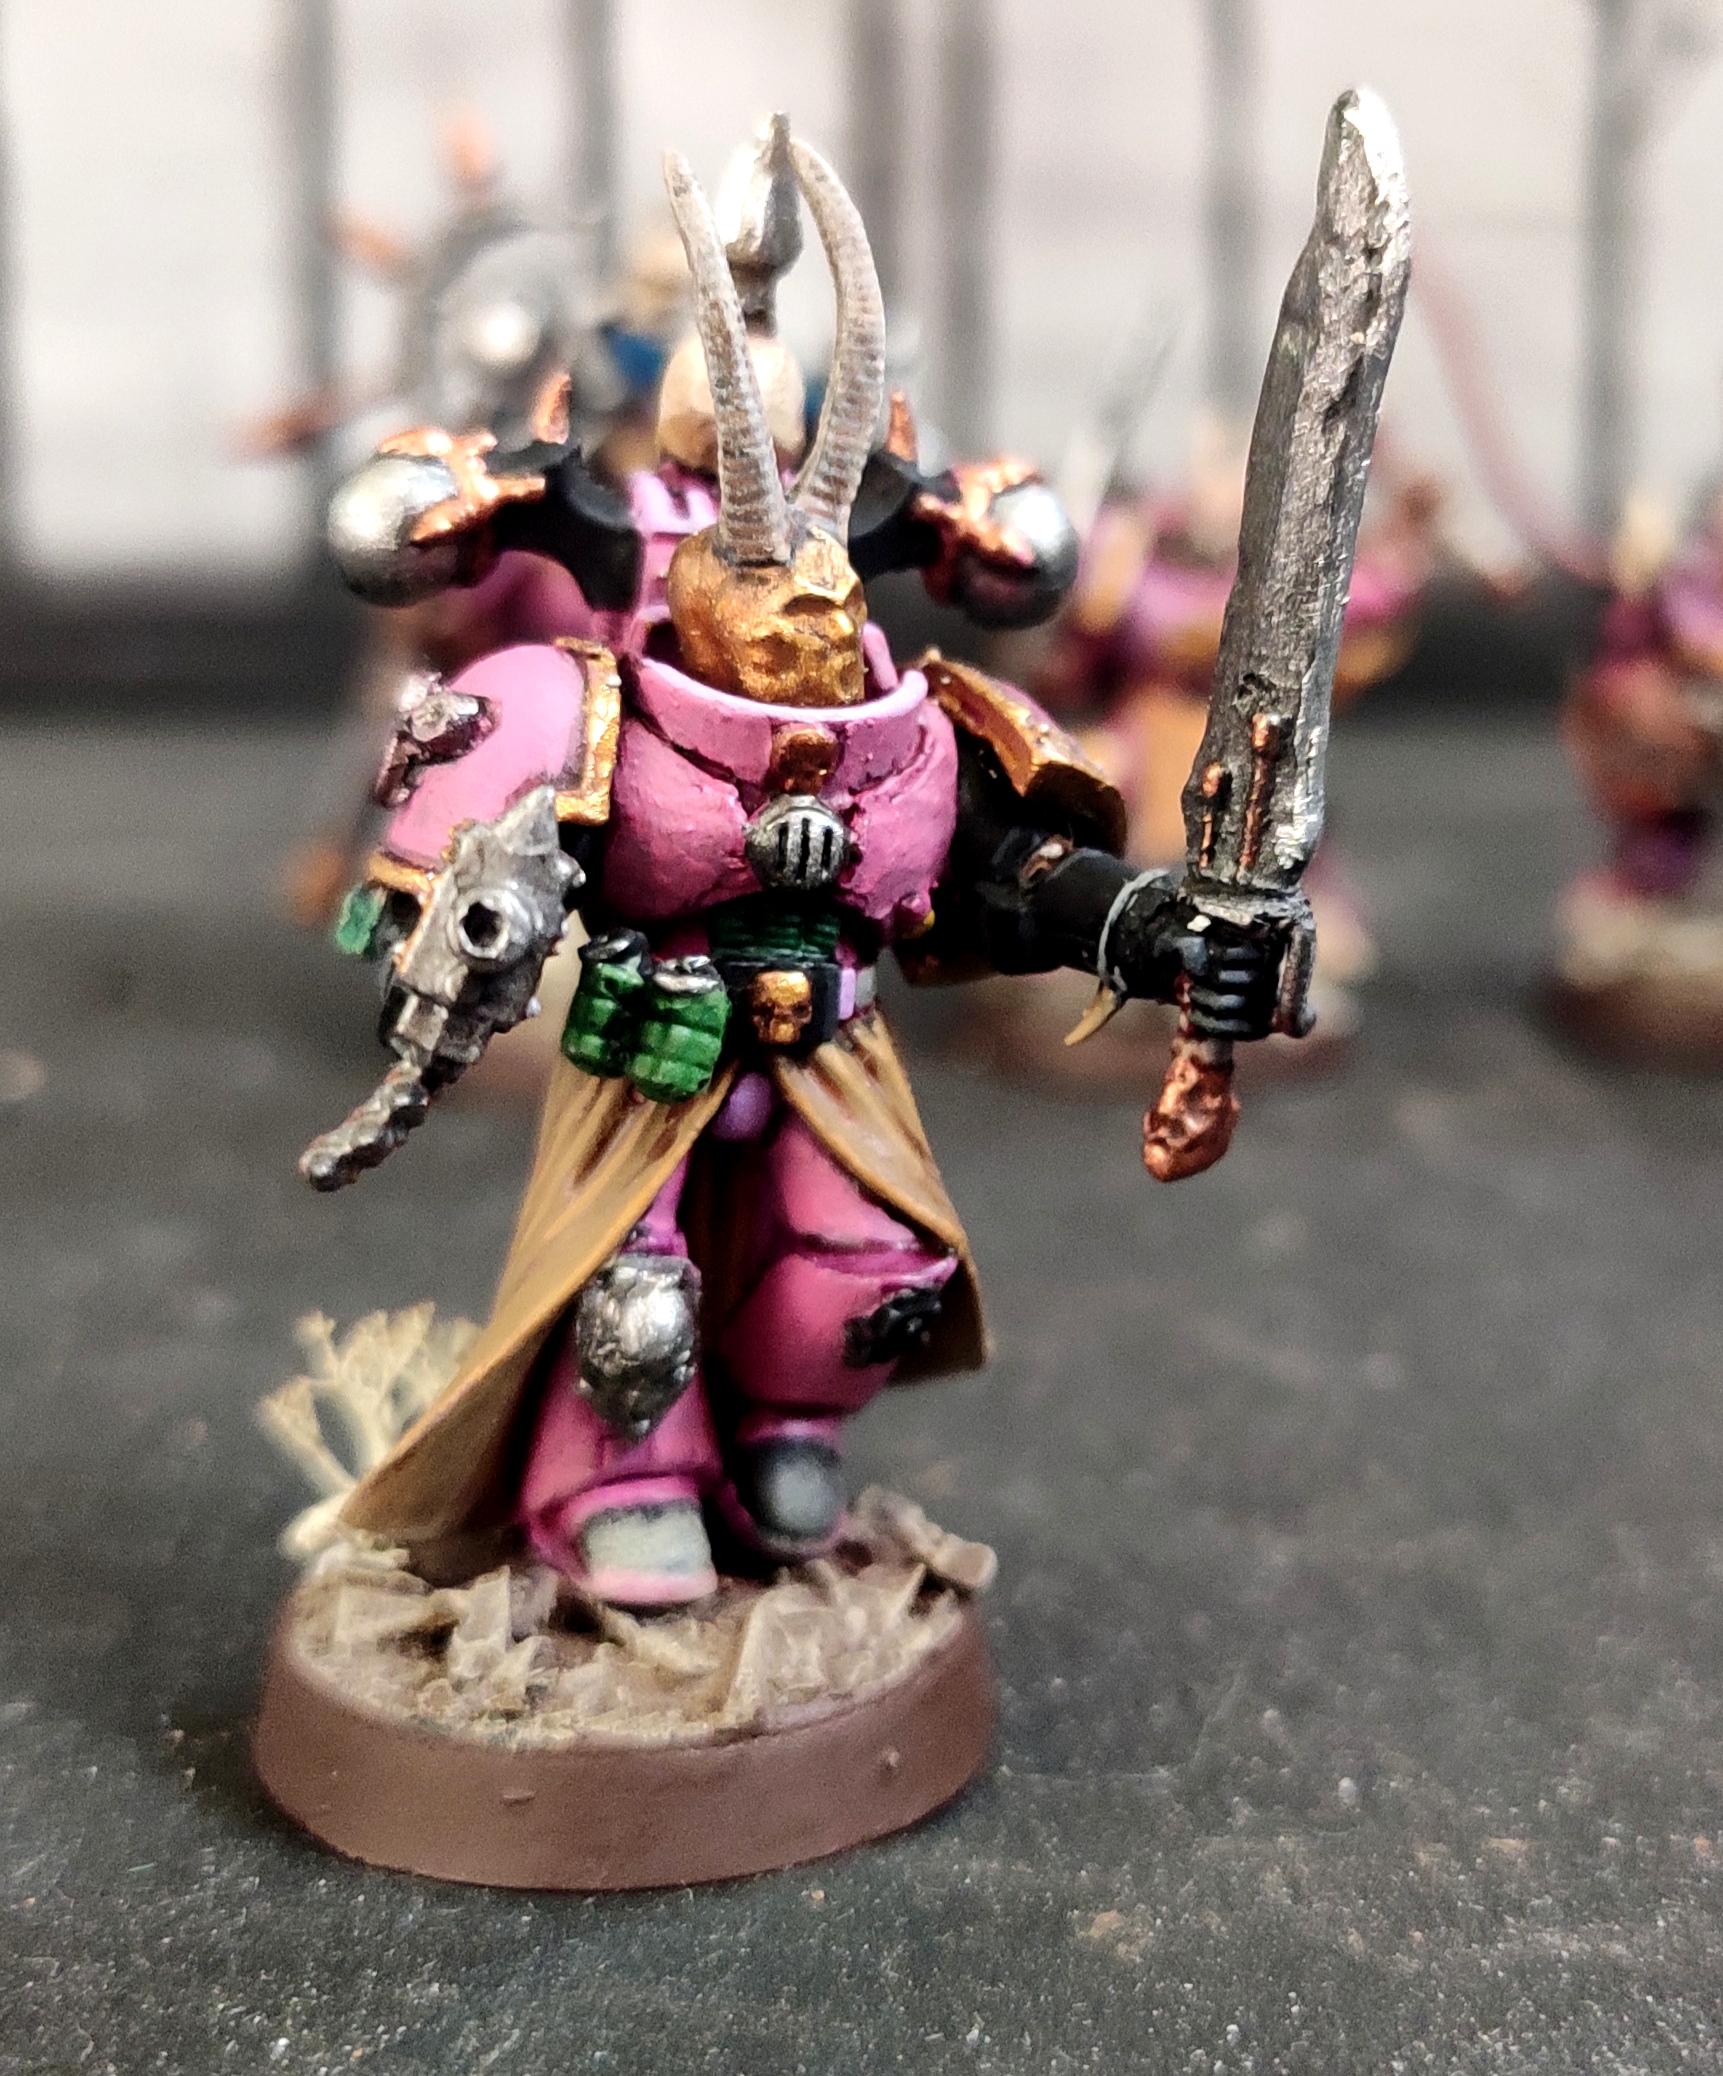 Chaos, Chaos Space Marines, Conversion, Emperor's Children, Heresy, Heretic Astartes, Infantry, Kitbash, Noise Marines, Perfection Or Death, Power Sword, Regiment, Slaanesh, Traitor Legions, Warhammer 40,000